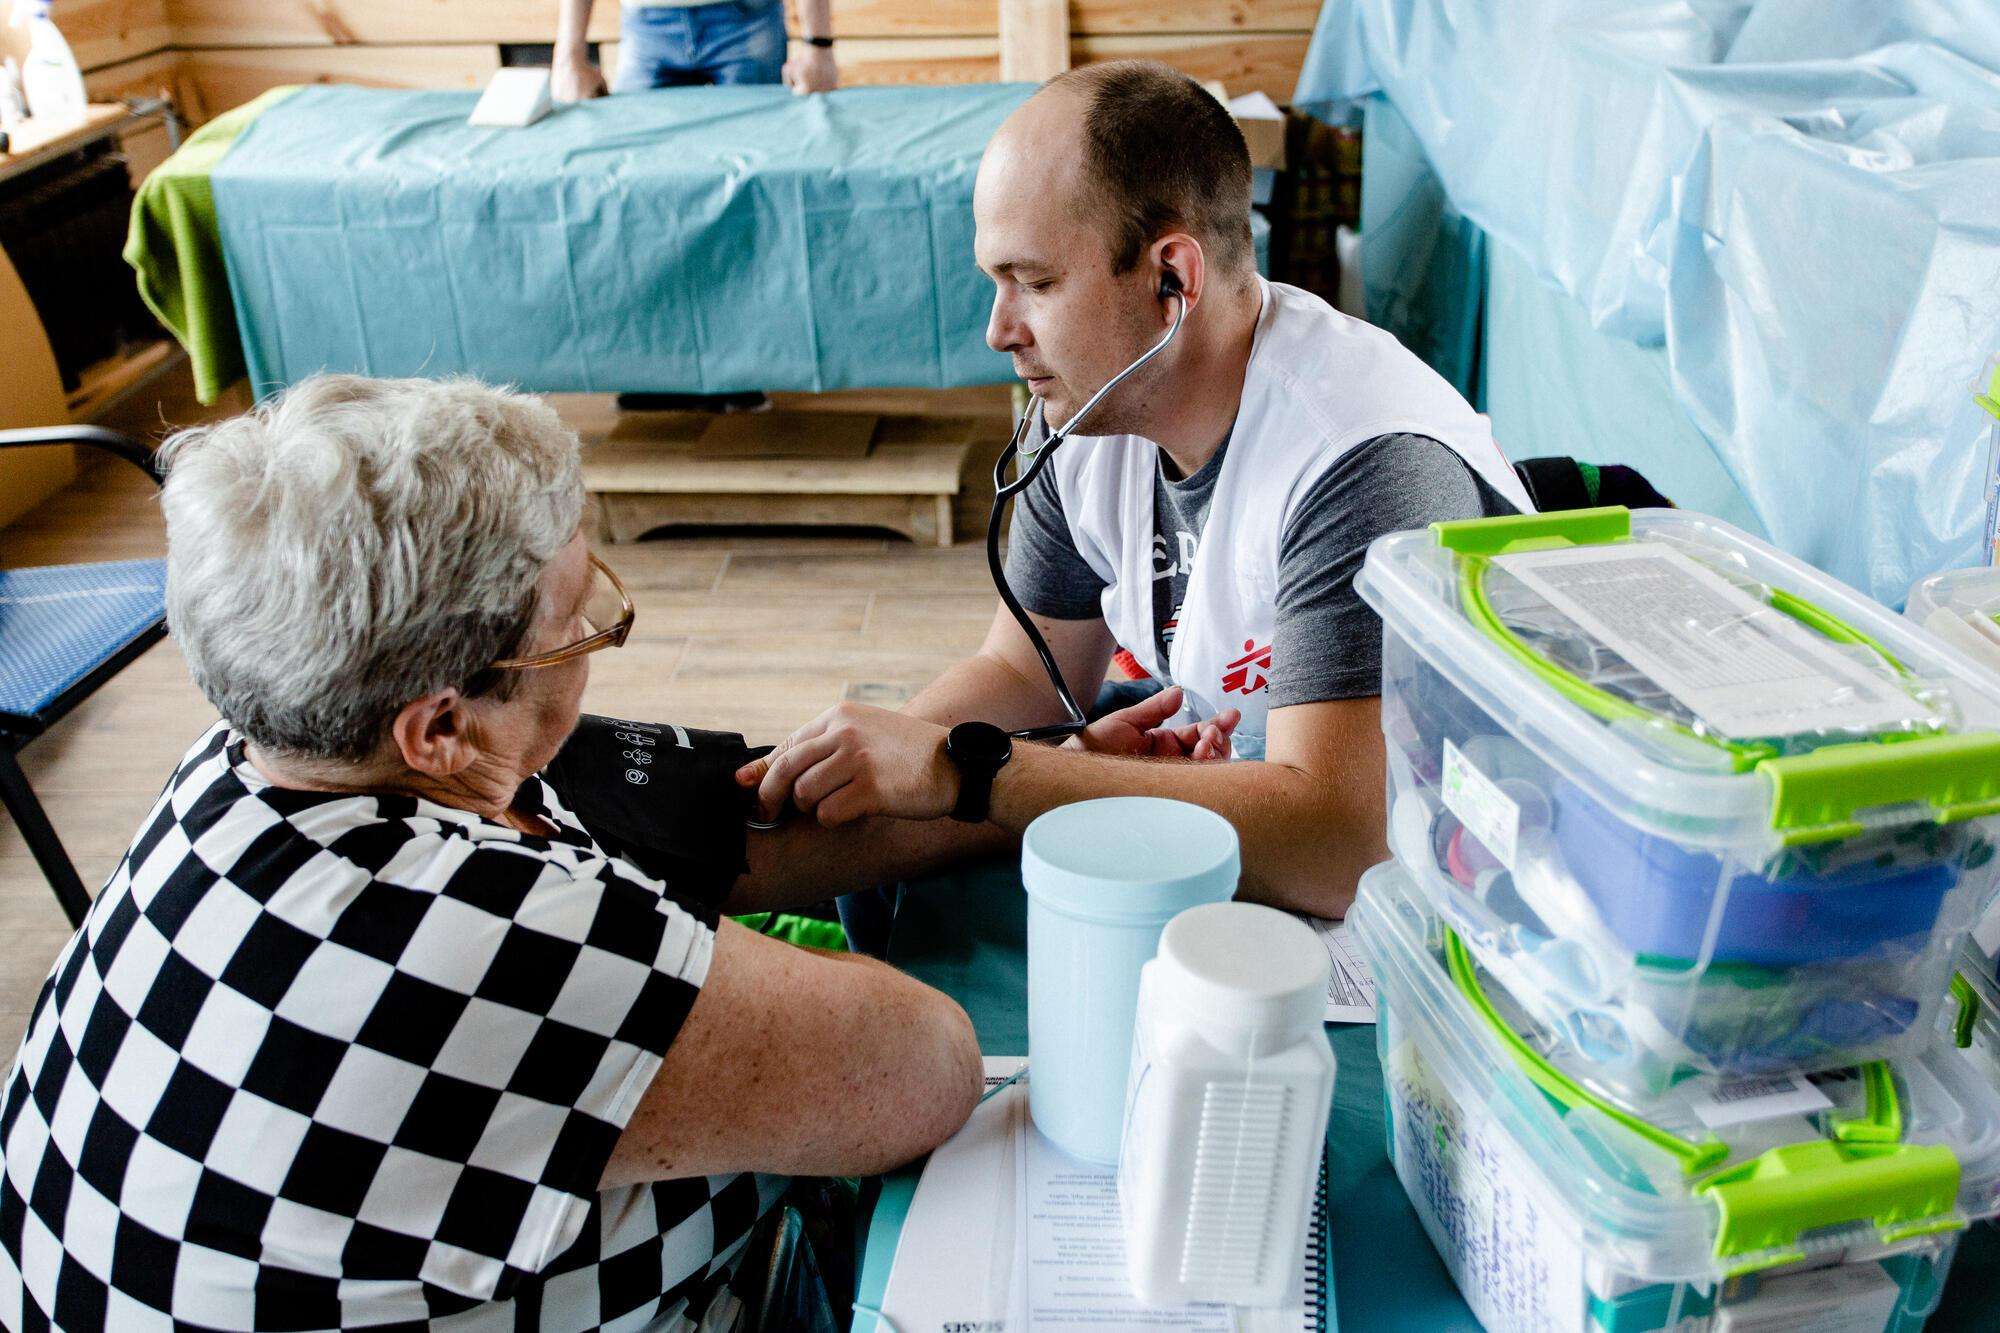 In Ukraine, MSF Works in Partnership with Local Groups